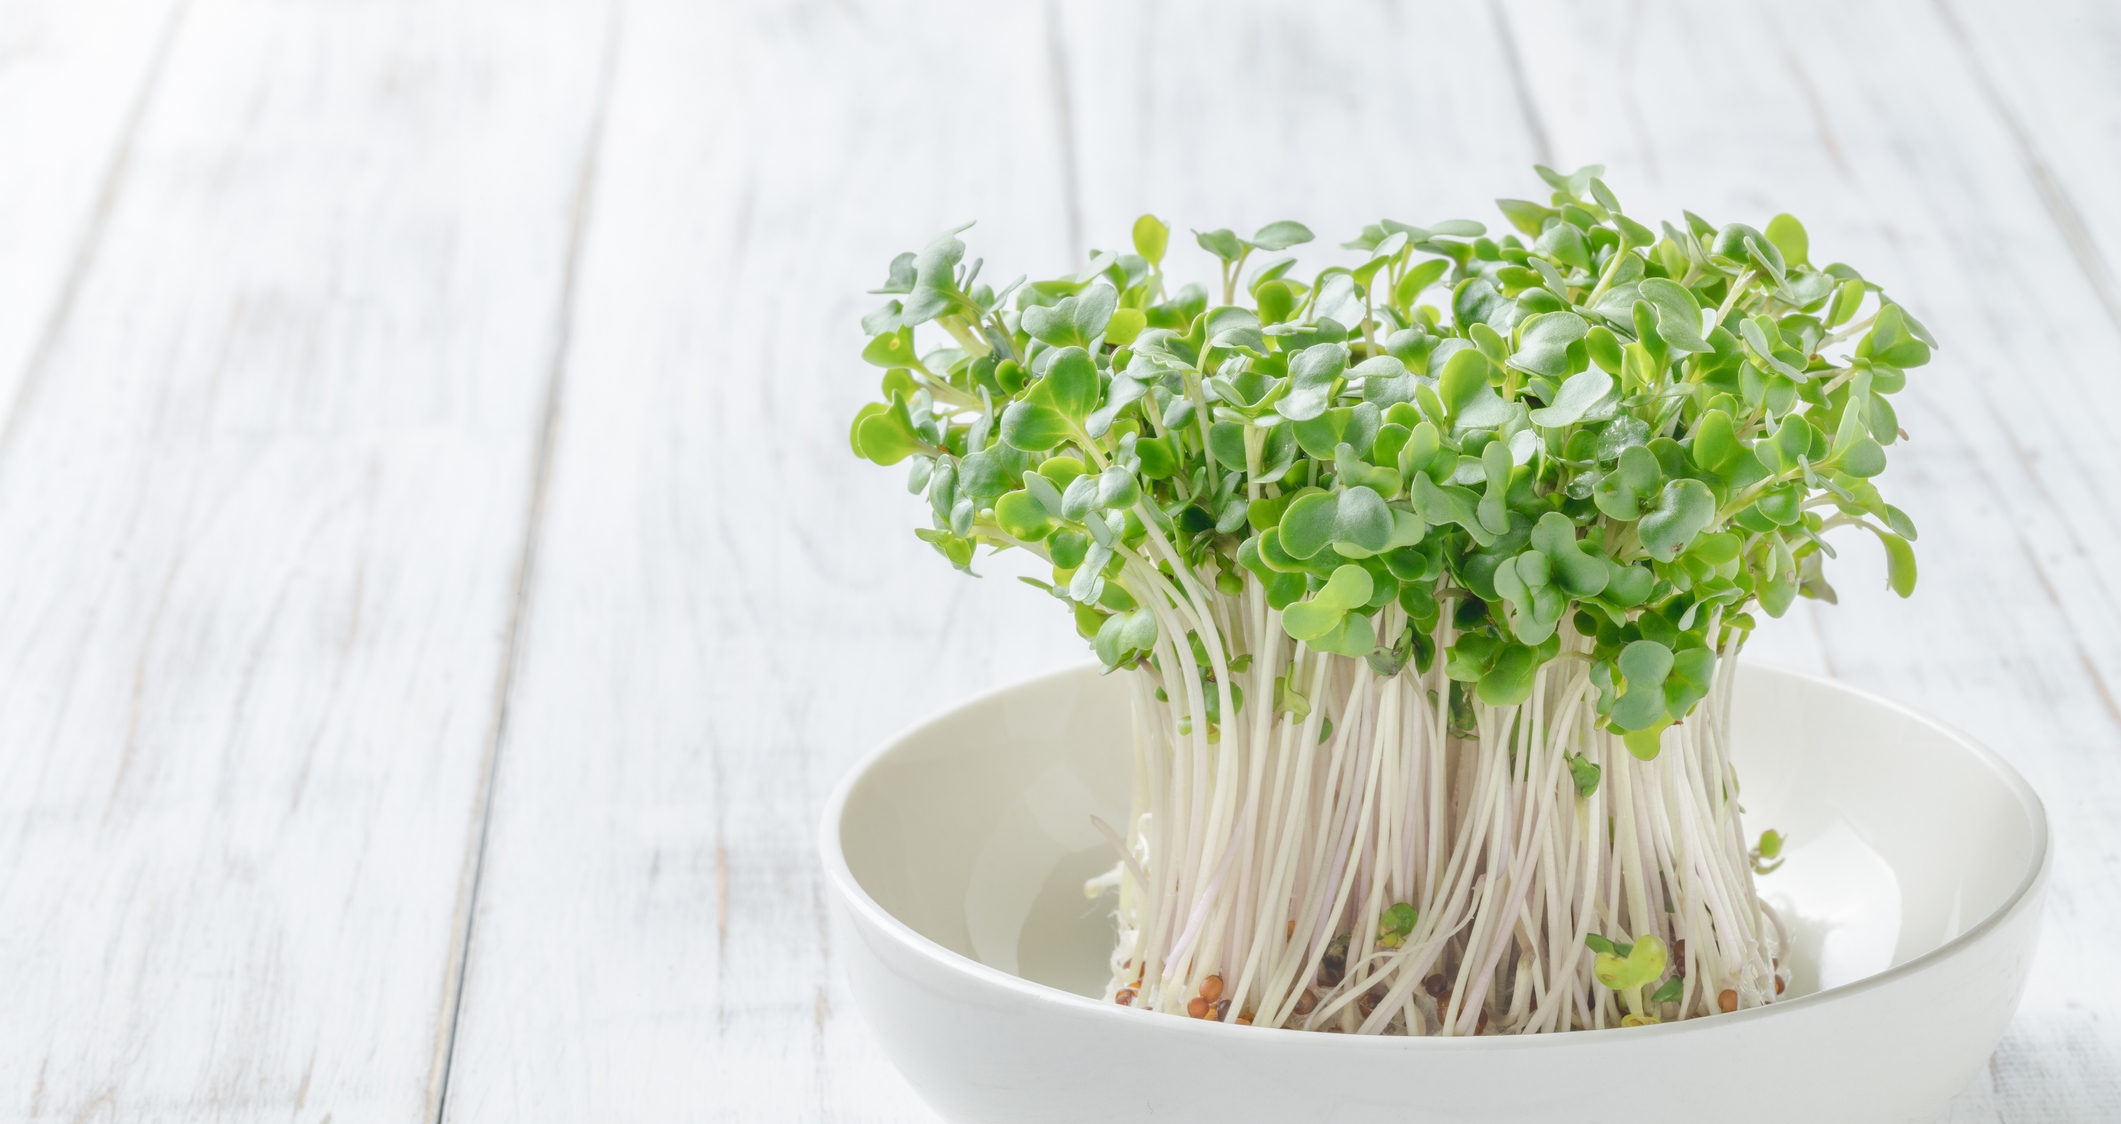 The Health Benefits of Broccoli Sprouts